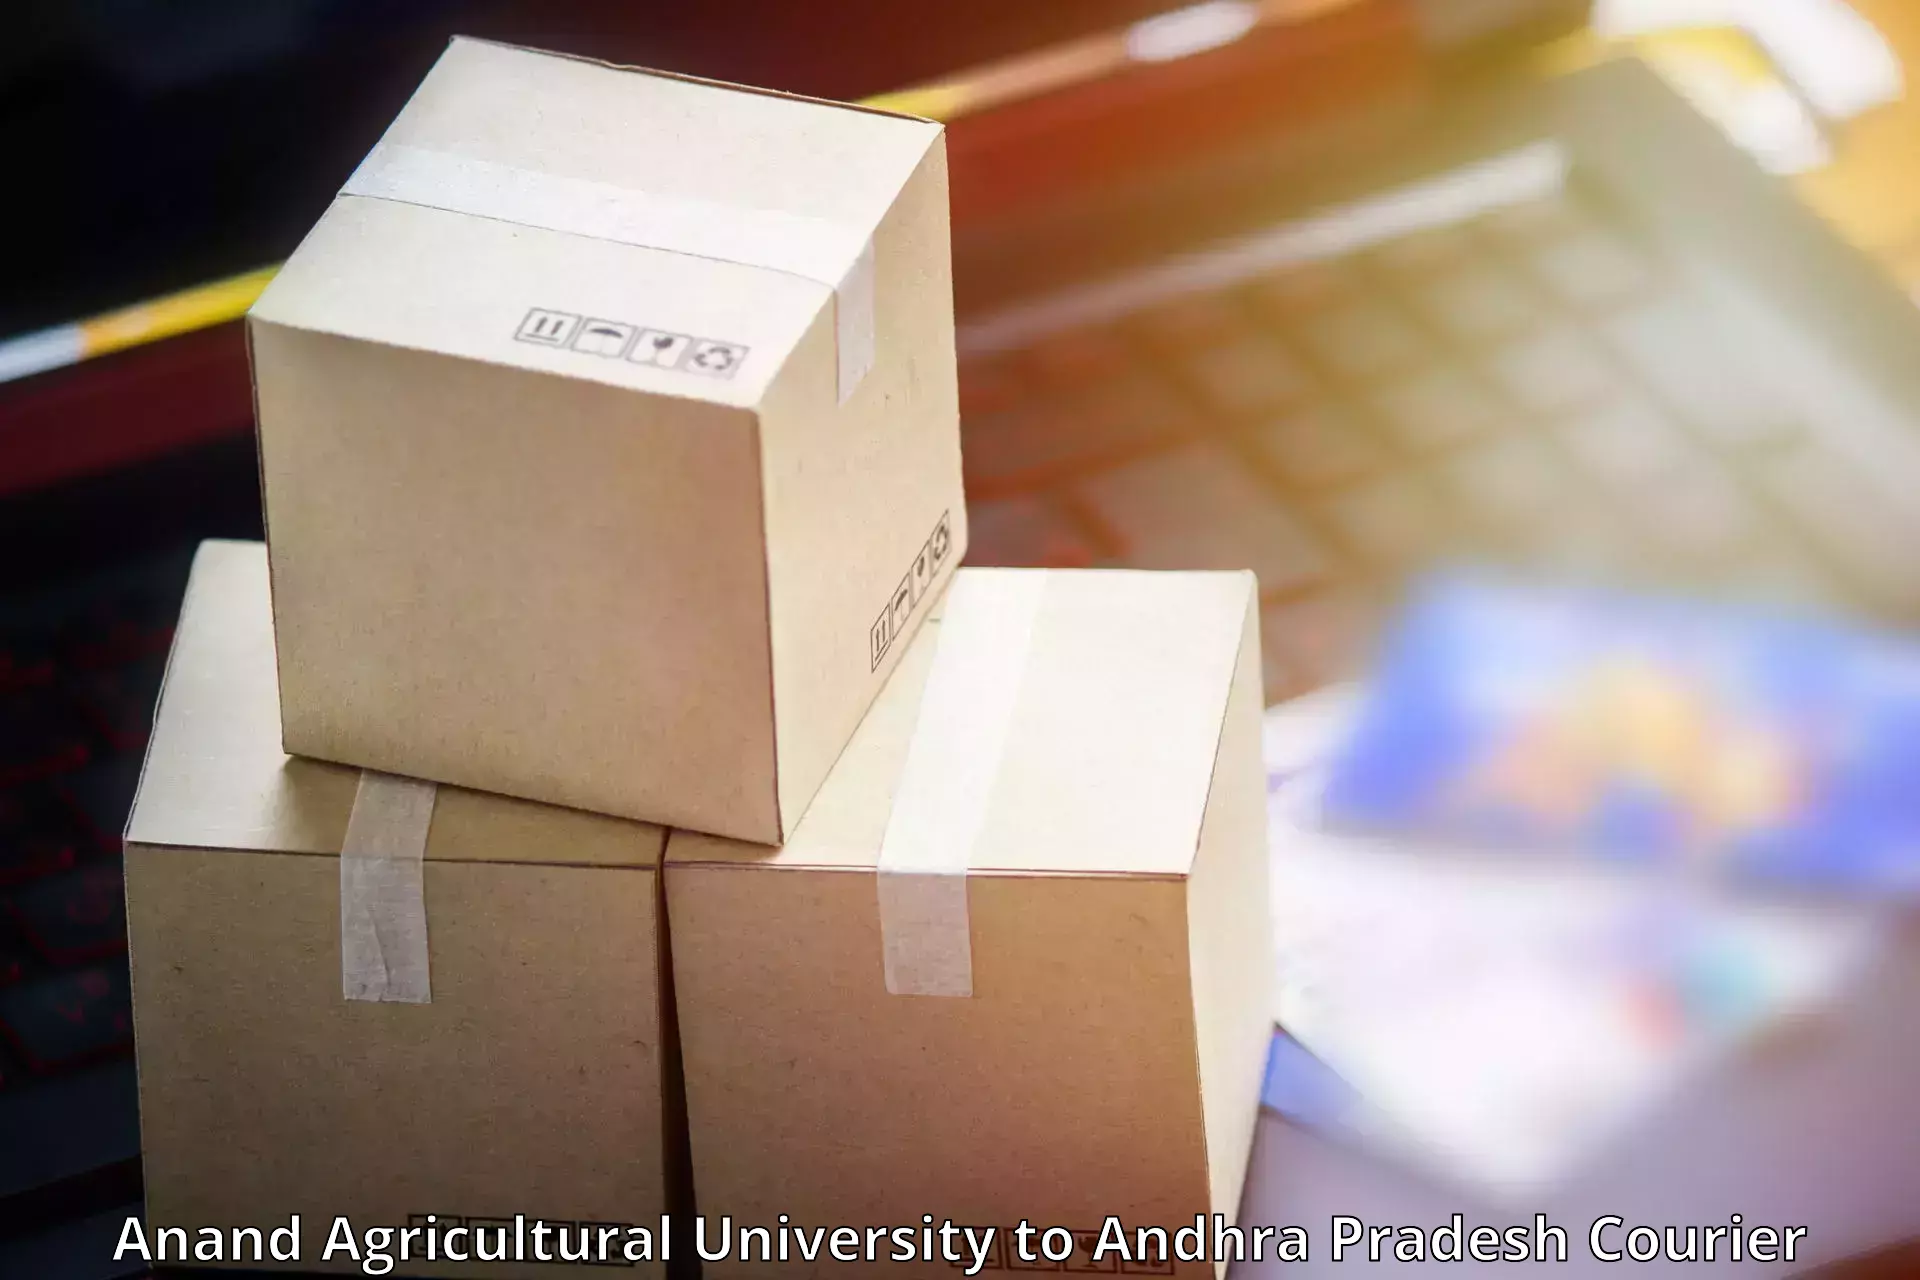 Cargo courier service Anand Agricultural University to Avanigadda